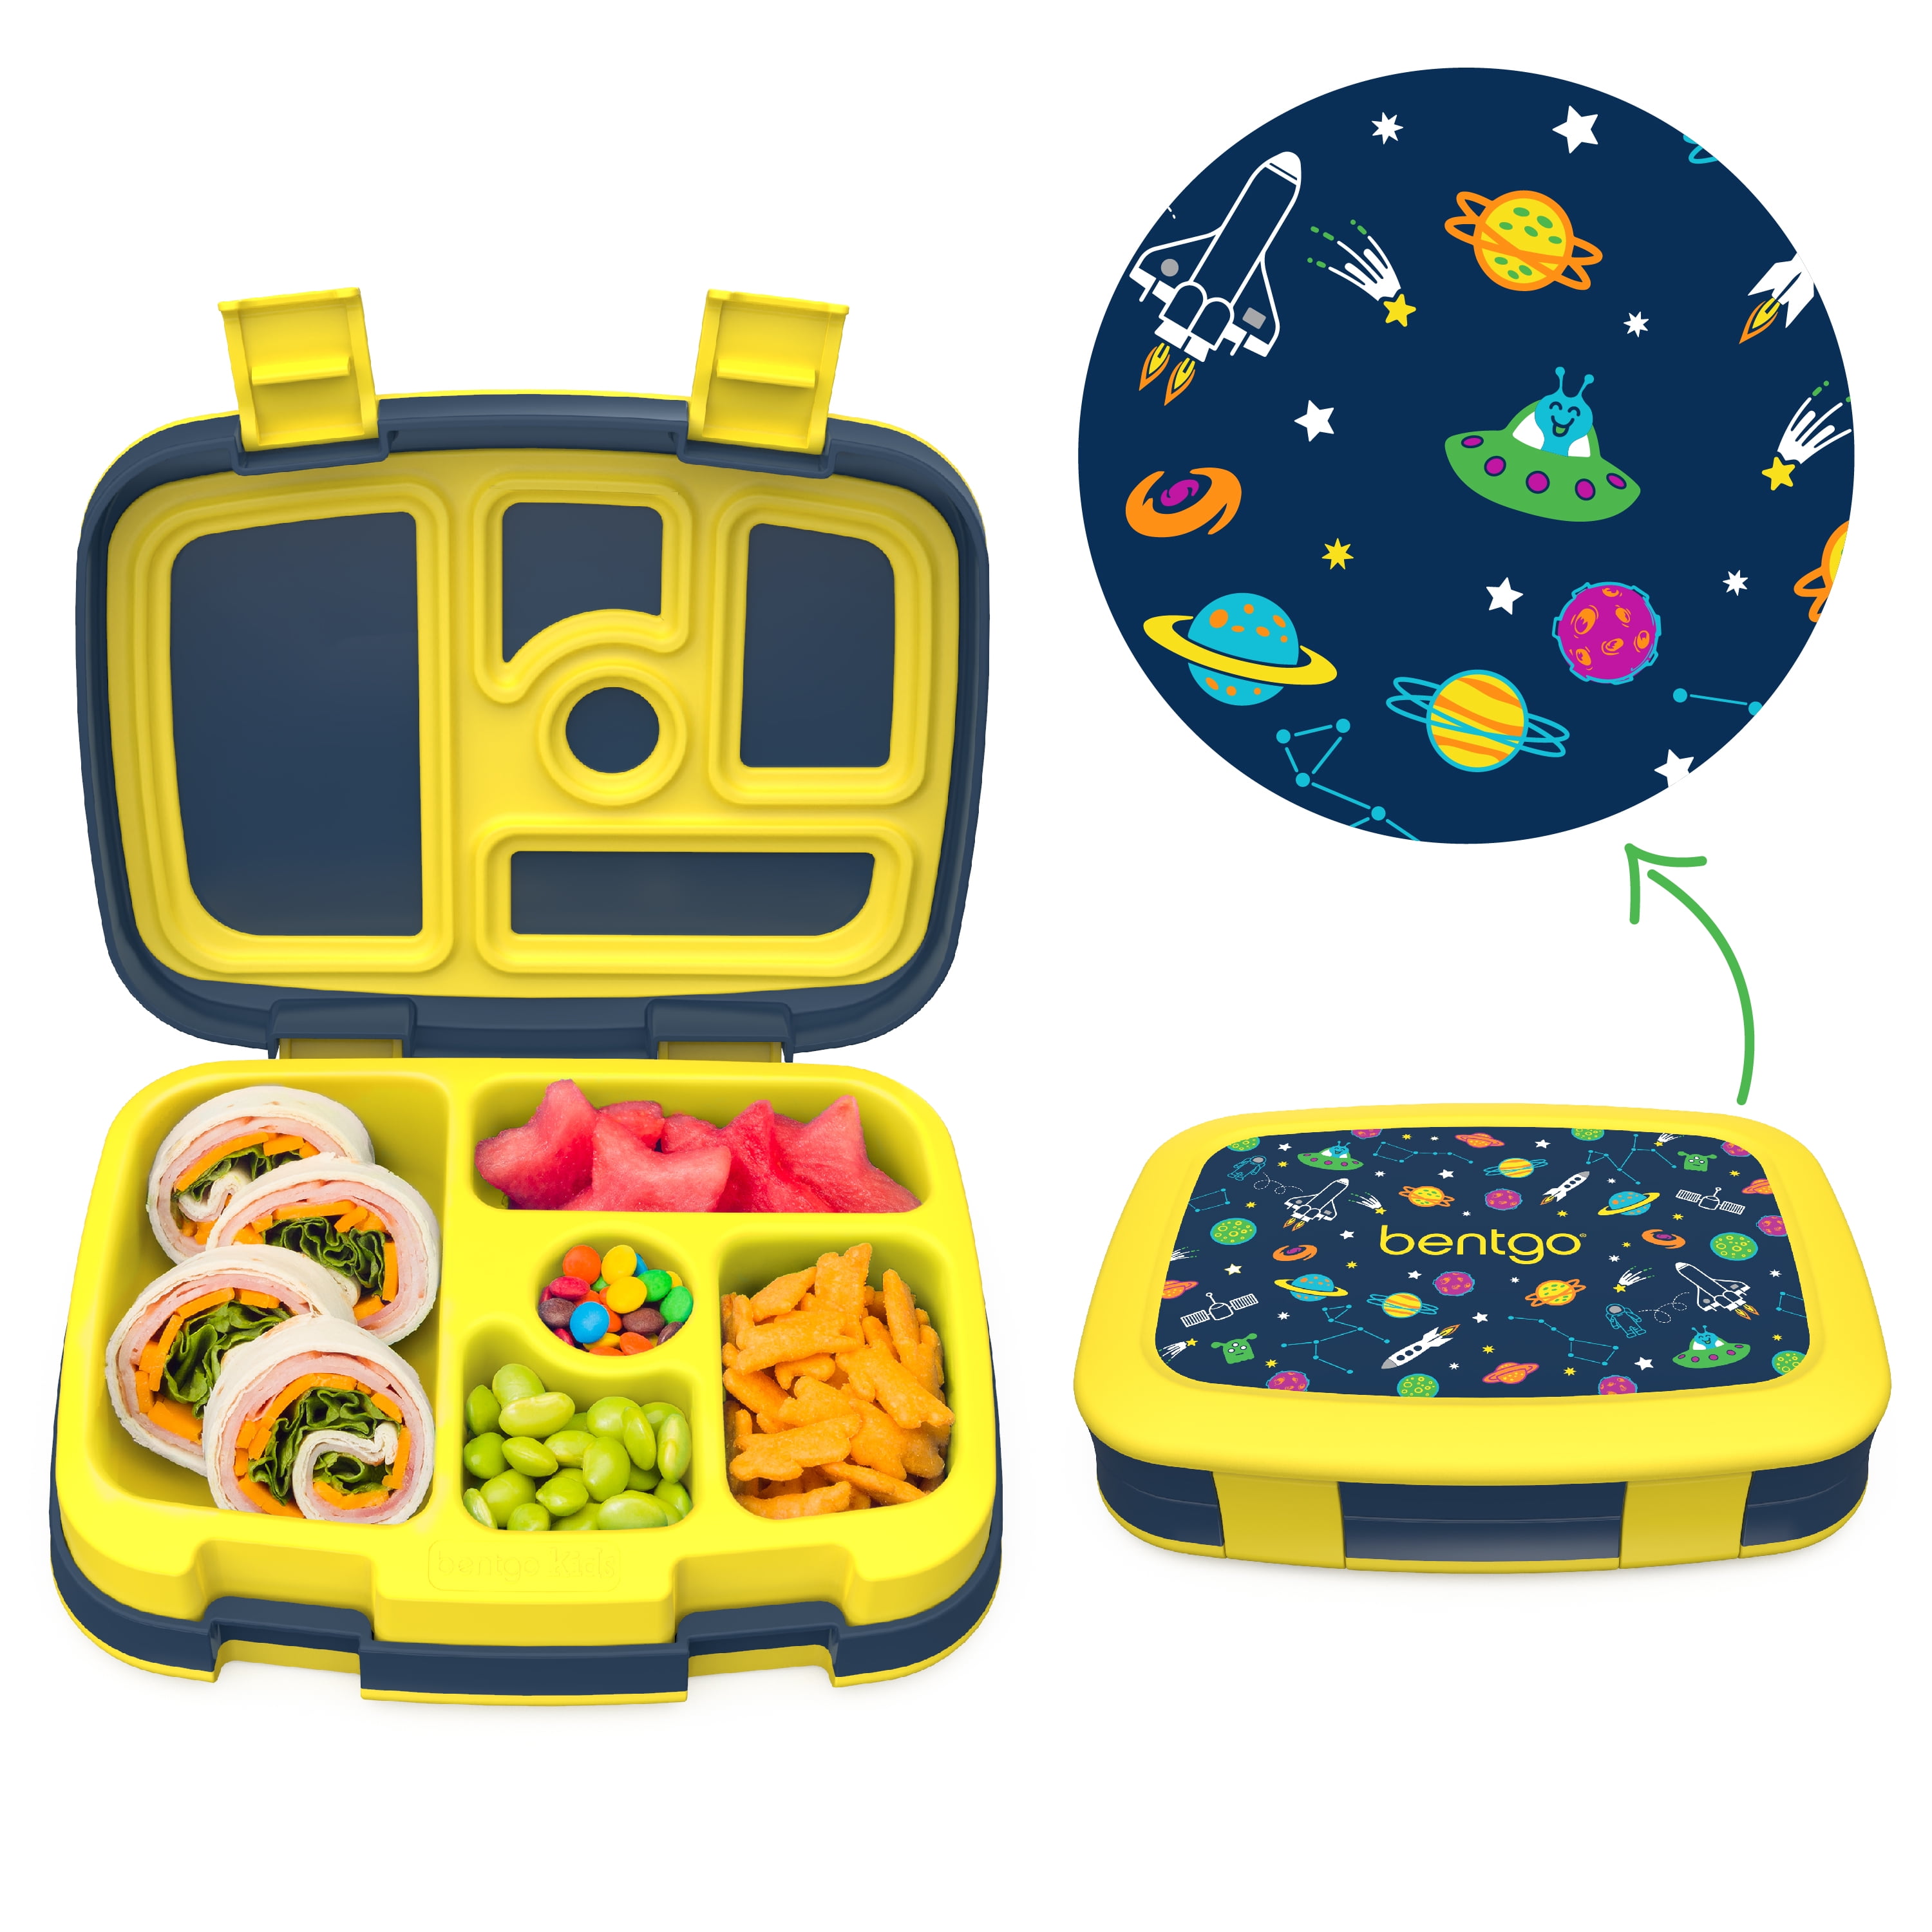 Bentgo Kids' Brights Leakproof, 5 Compartment Bento-style Kids' Lunch Box -  Orange : Target